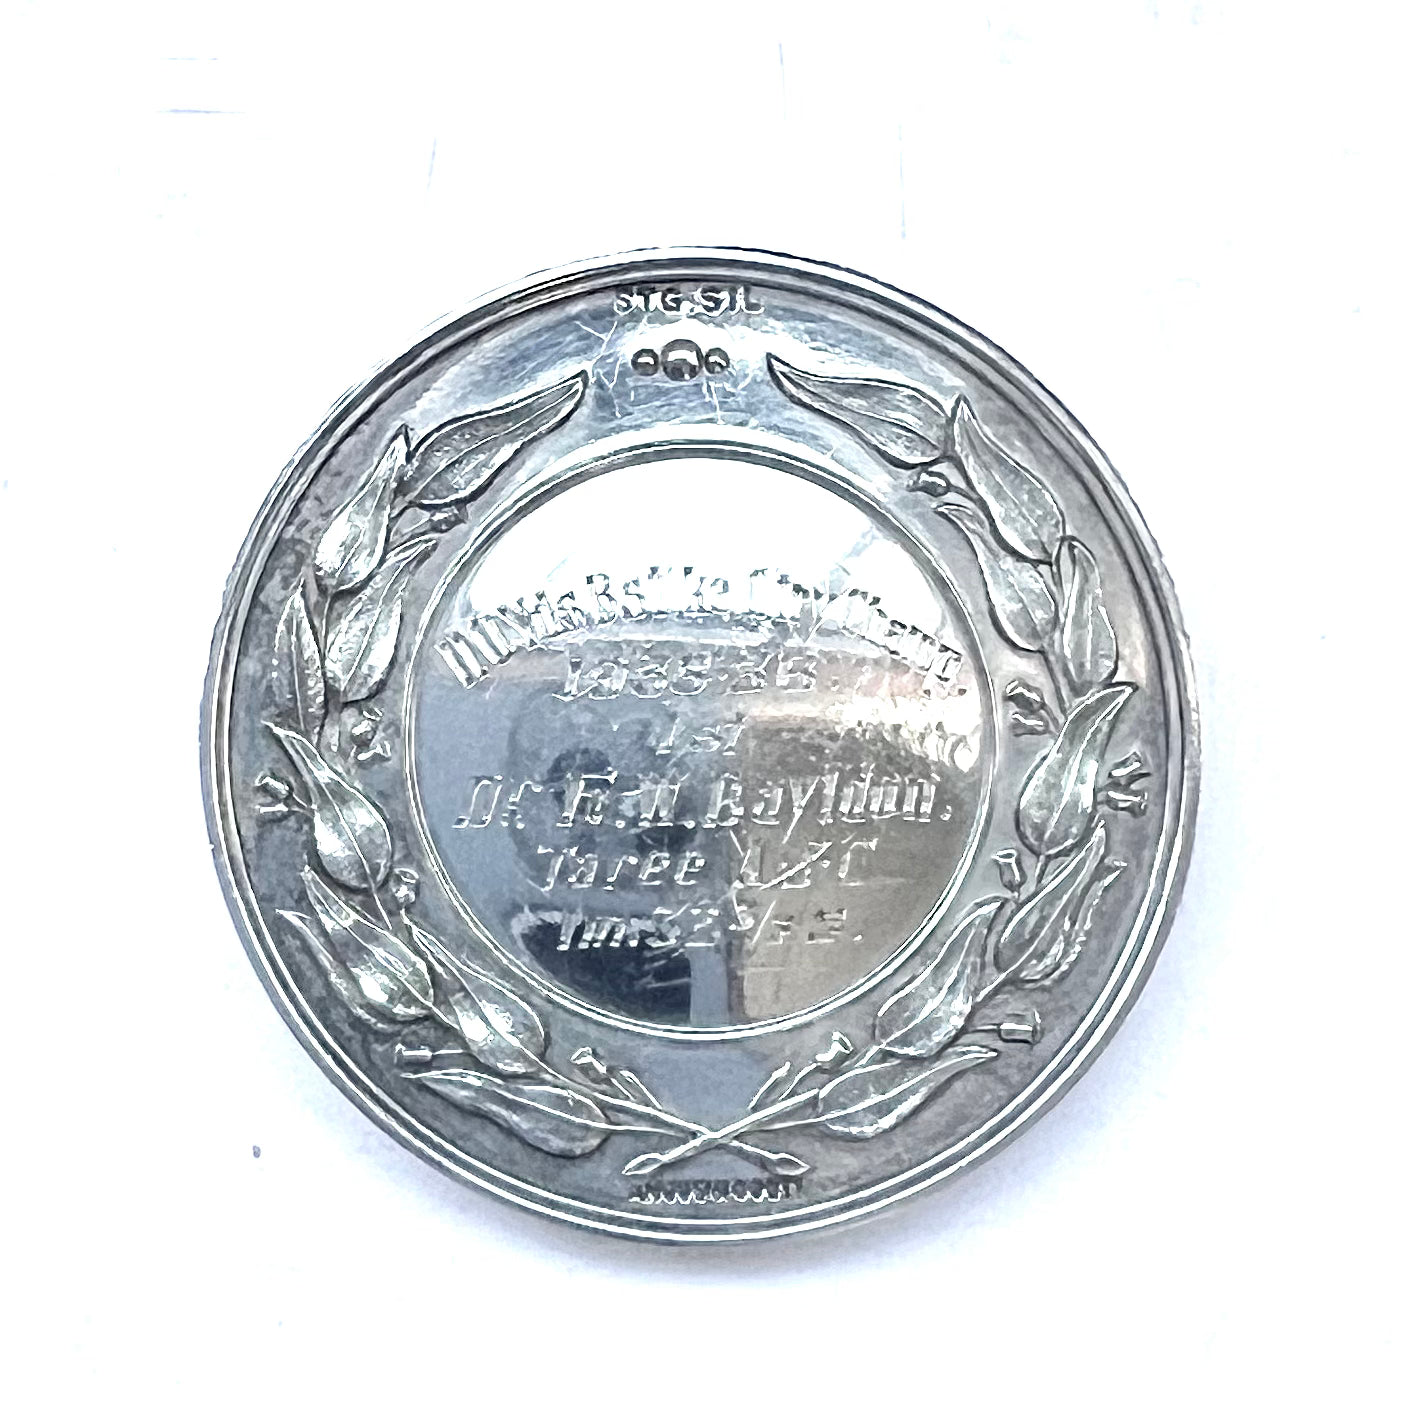 NSW Amateur Swimming Association sterling silver medal, Angus & Coote circa 1935-1936